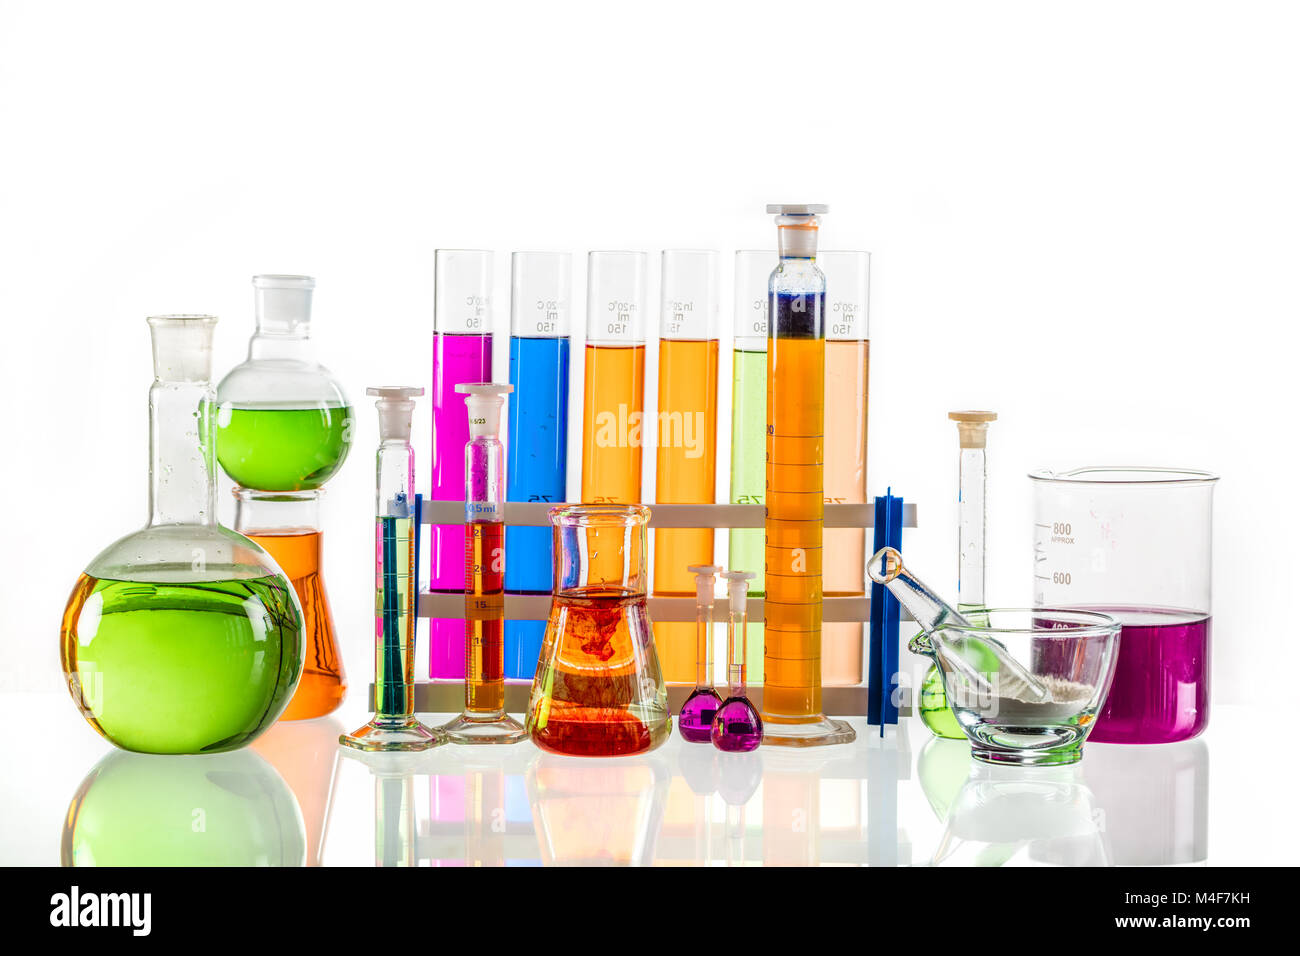 Laboratory glass set filled with colorful substances. Stock Photo